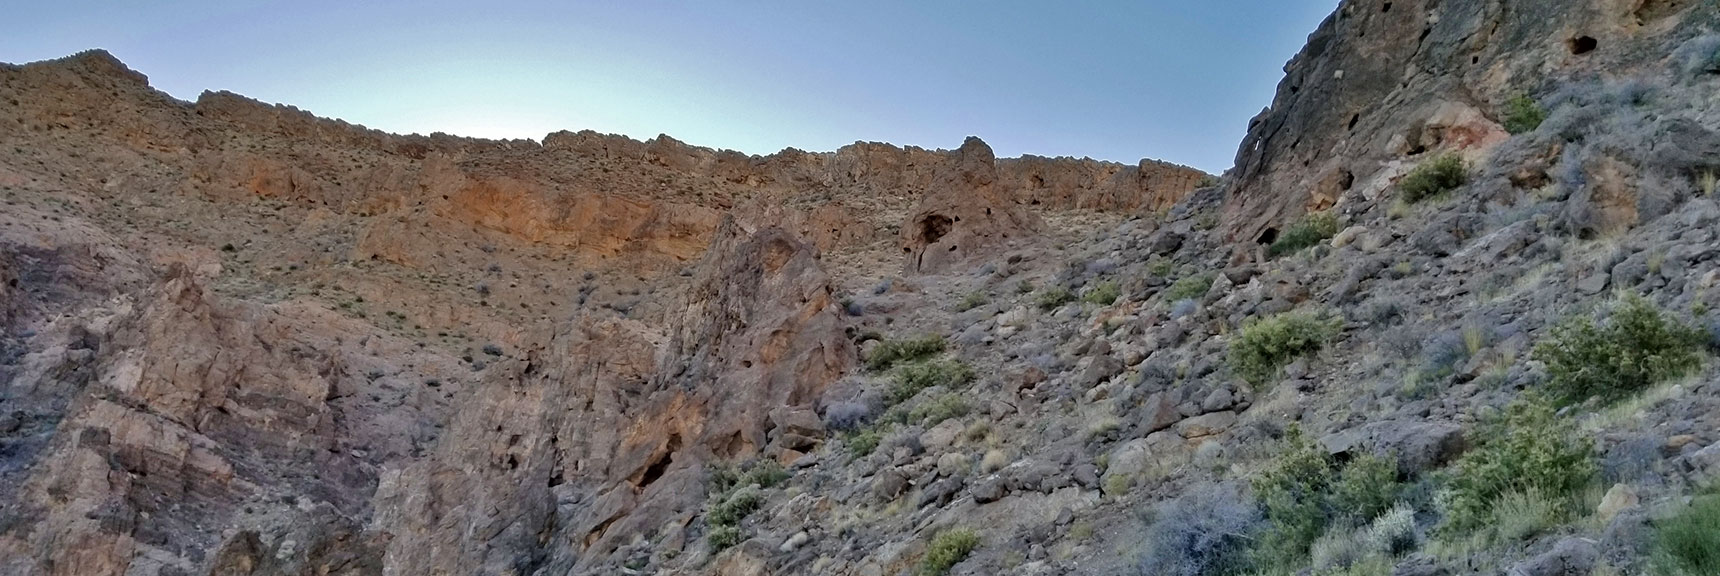 Pass in the Second Northern Ridge System in the Muddy Mountains Wilderness, Nevada